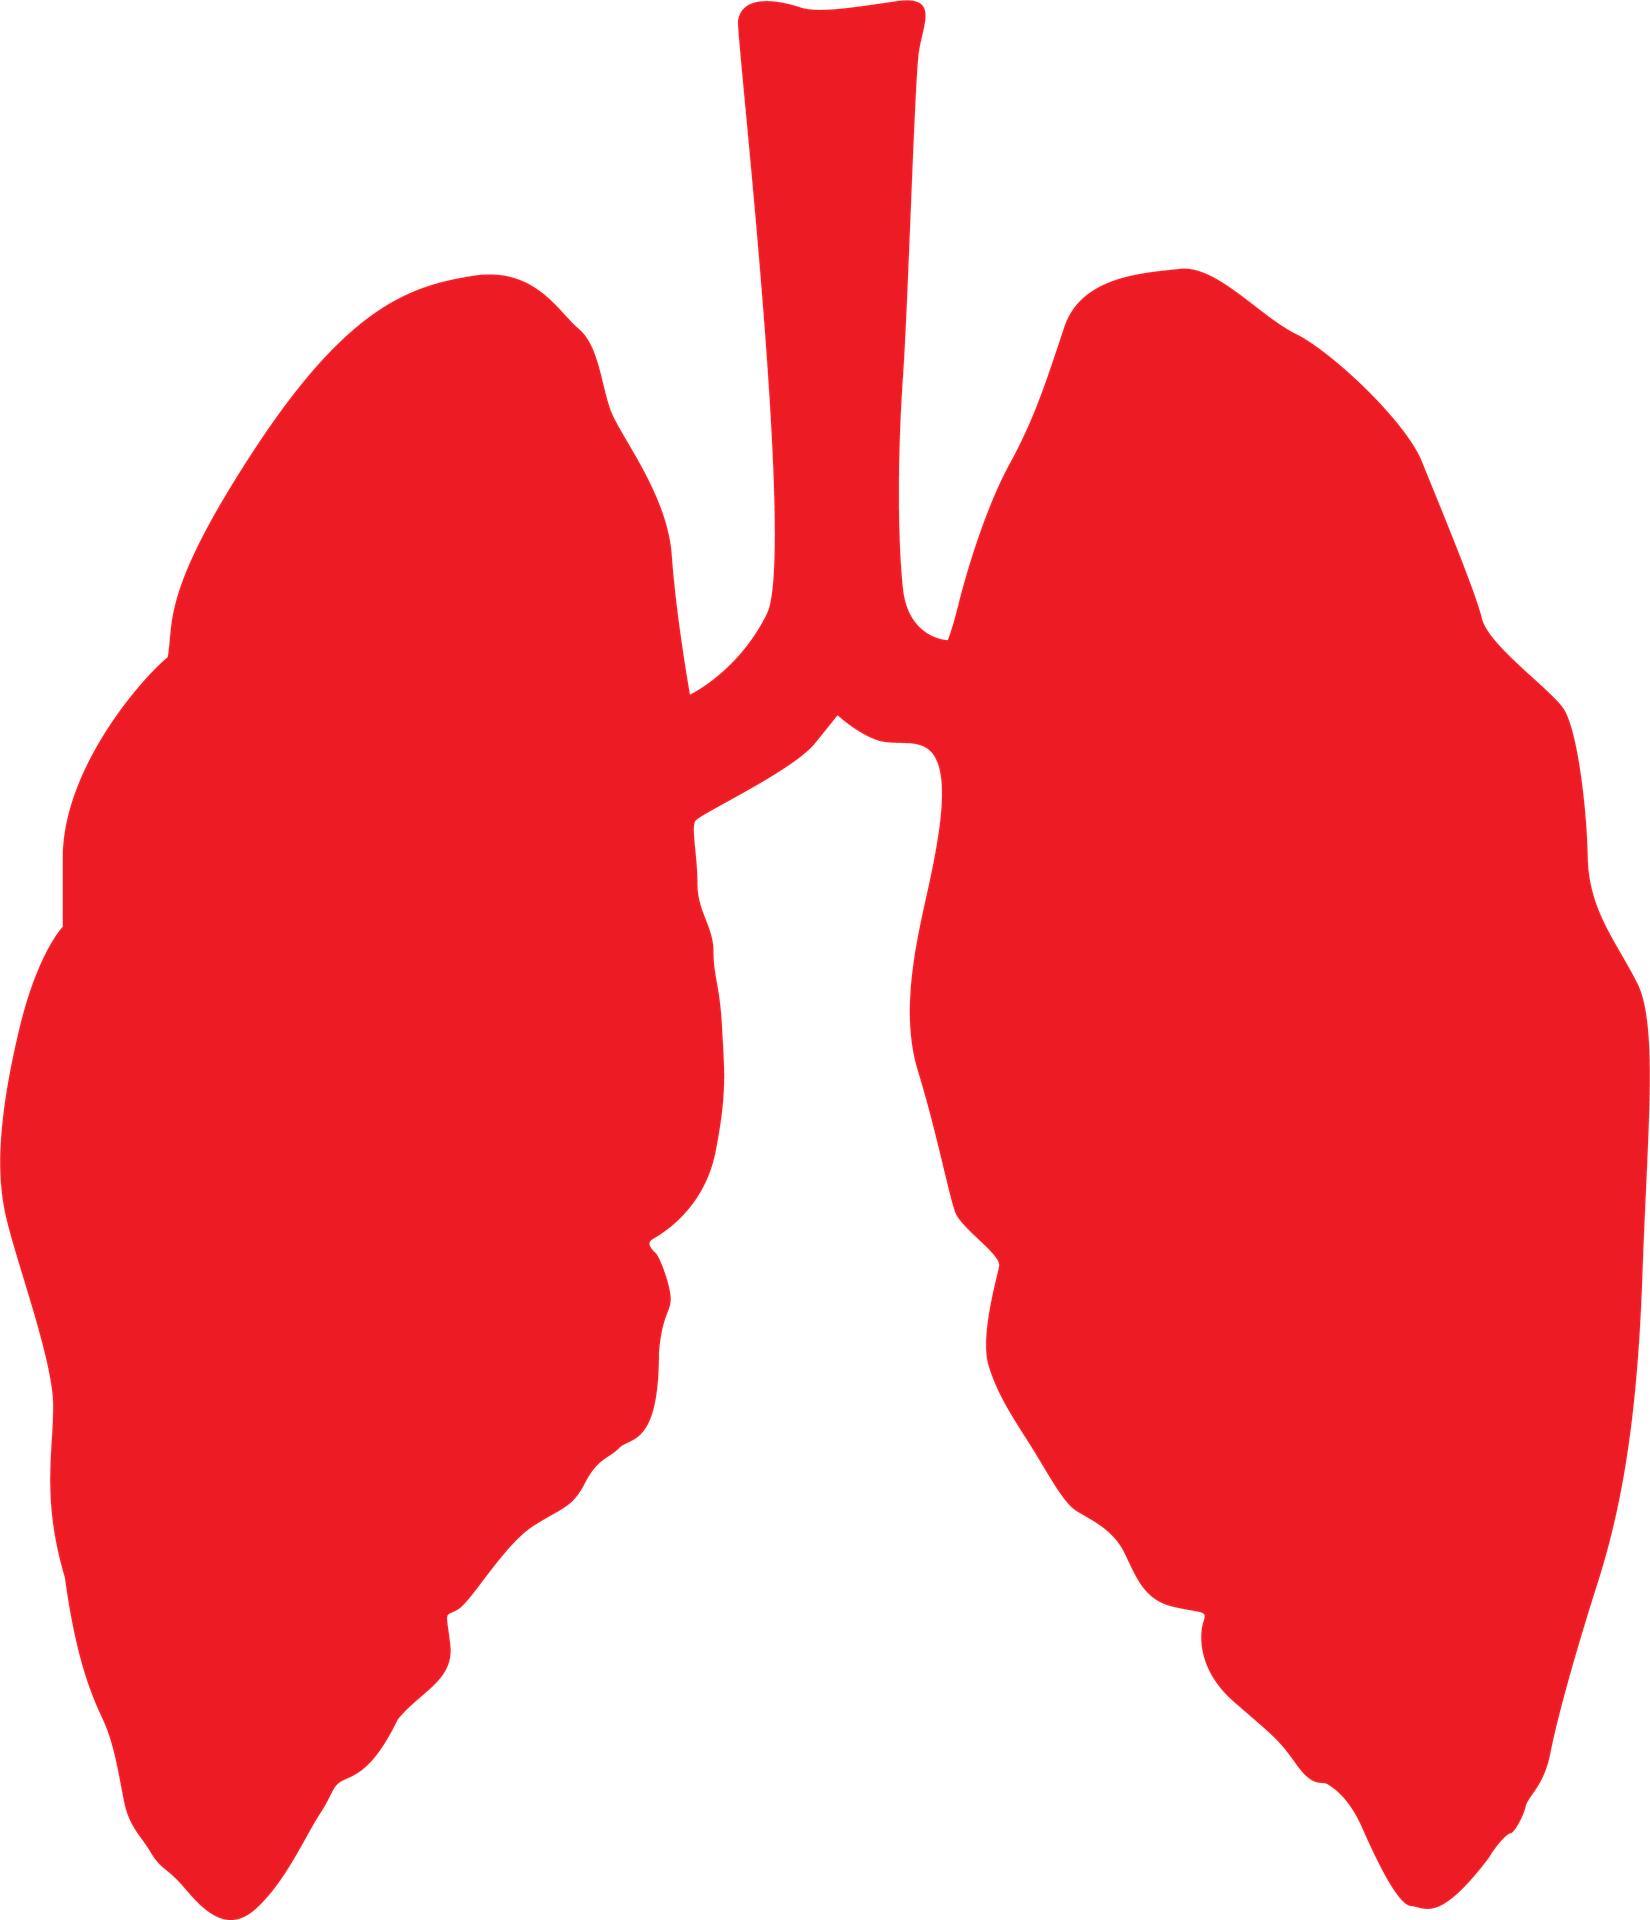 lungs-3464515_1920-1